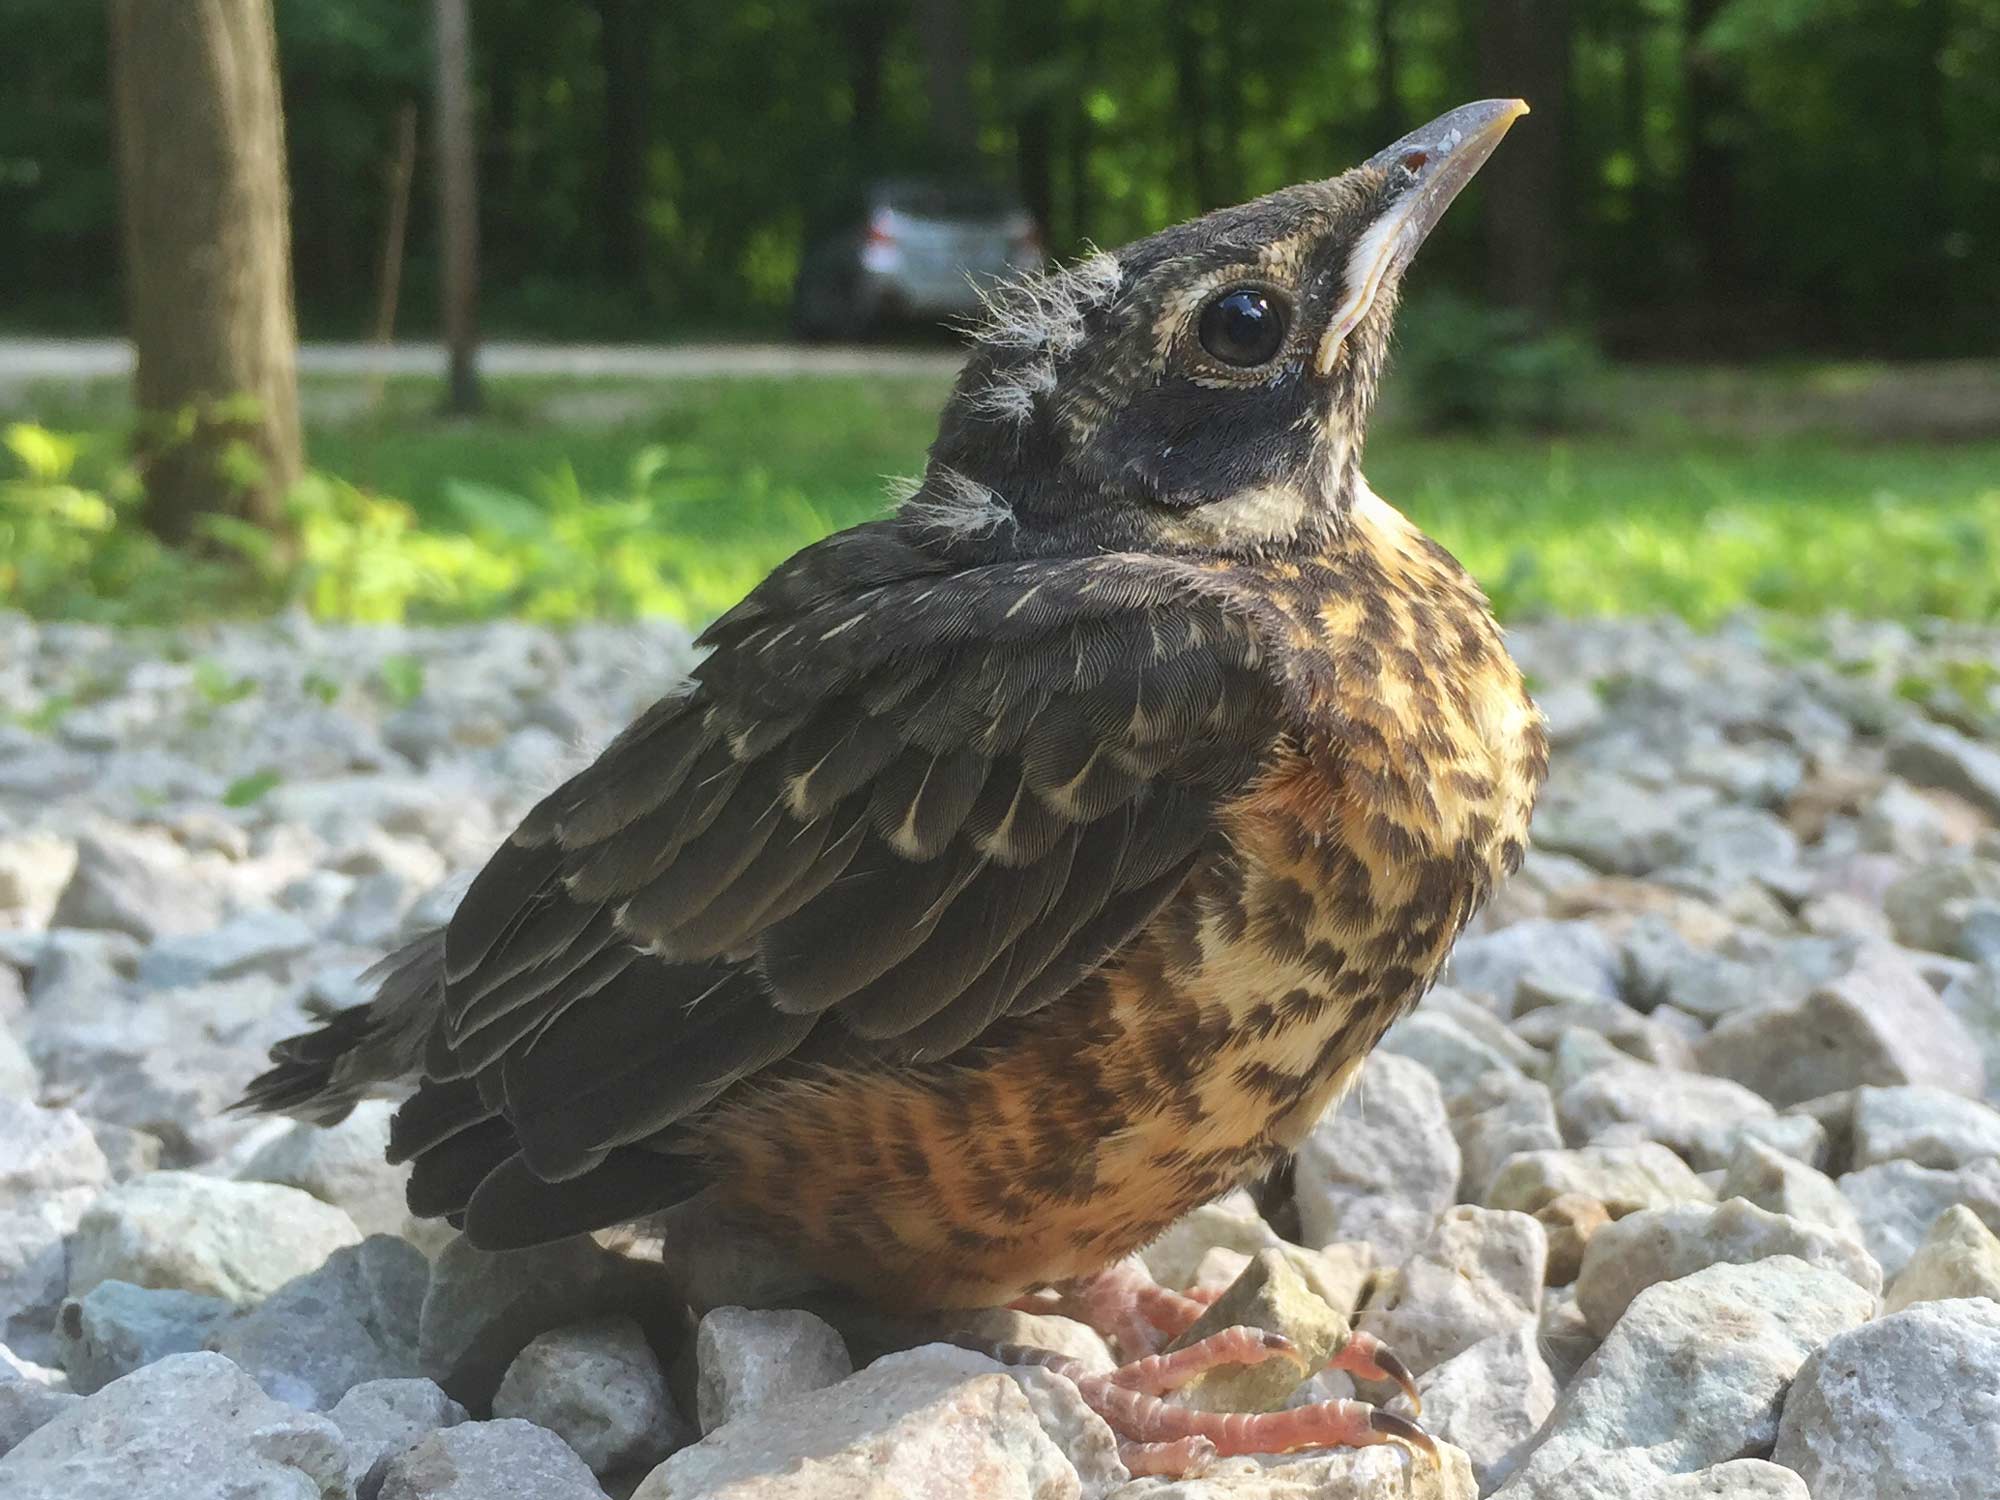 A young robin on the ground